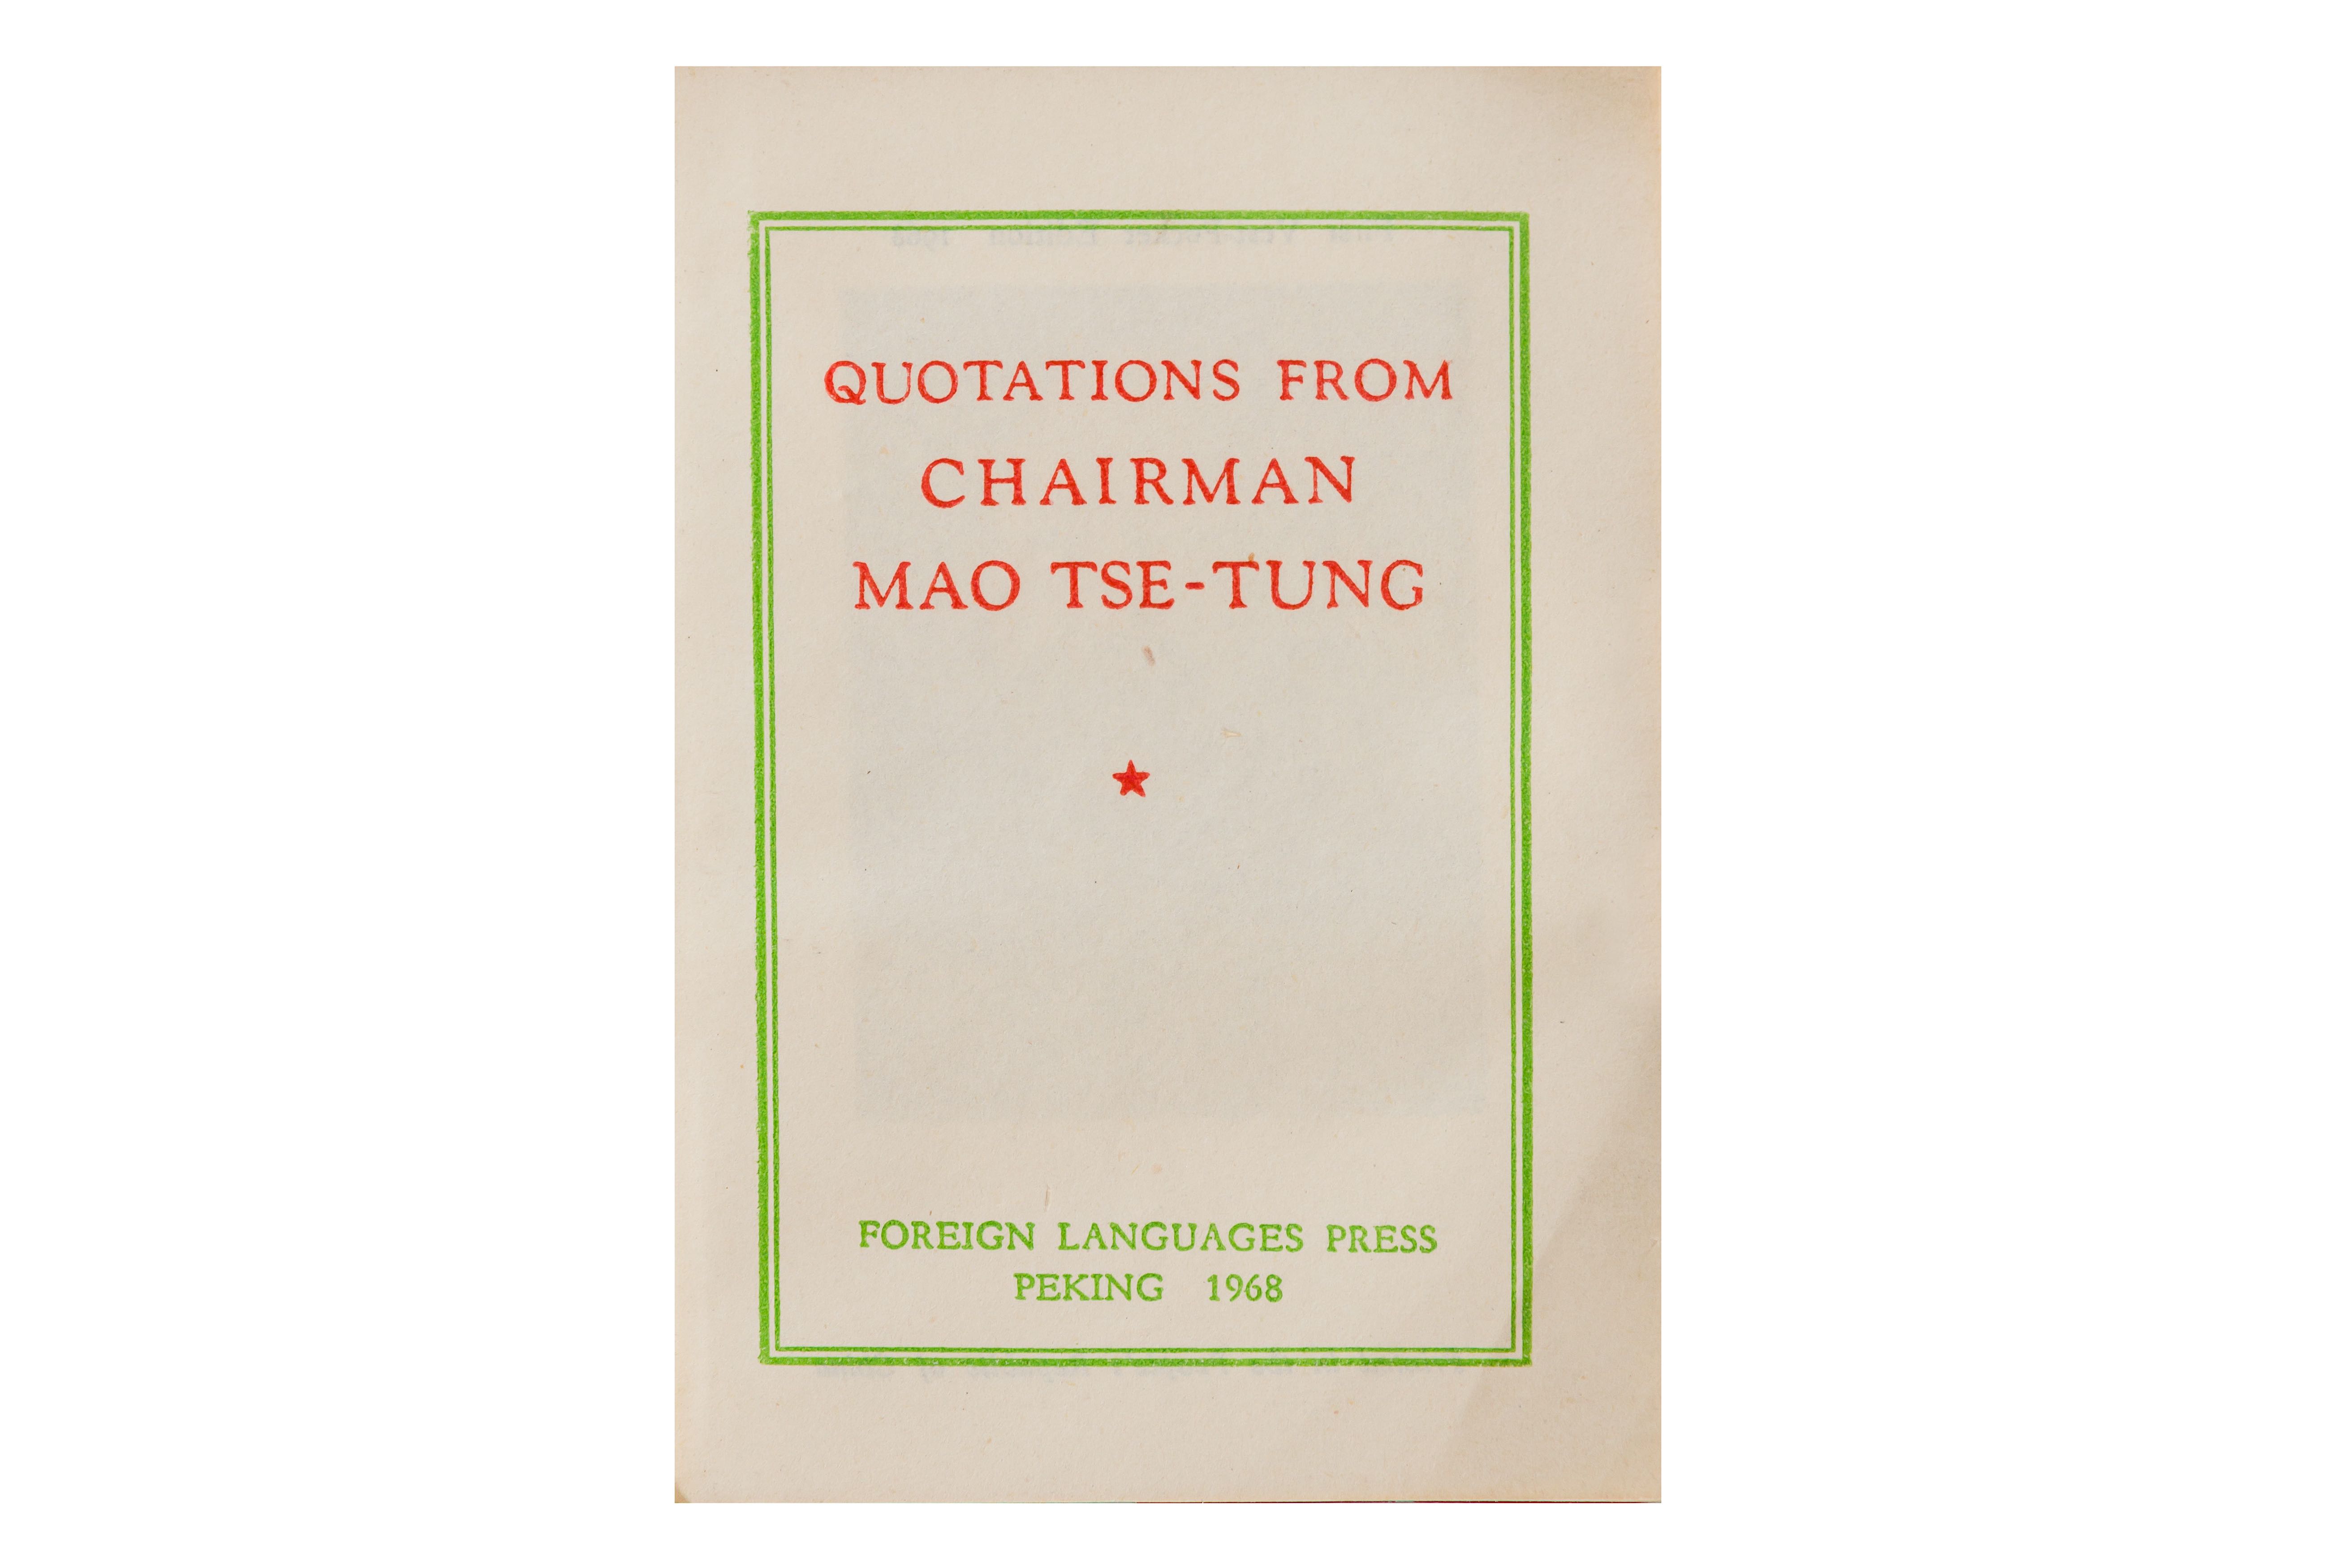 Mao Tse-Tung: Quotations From Chairman Mao Tse-Tung [Little Red Book] - Image 3 of 13